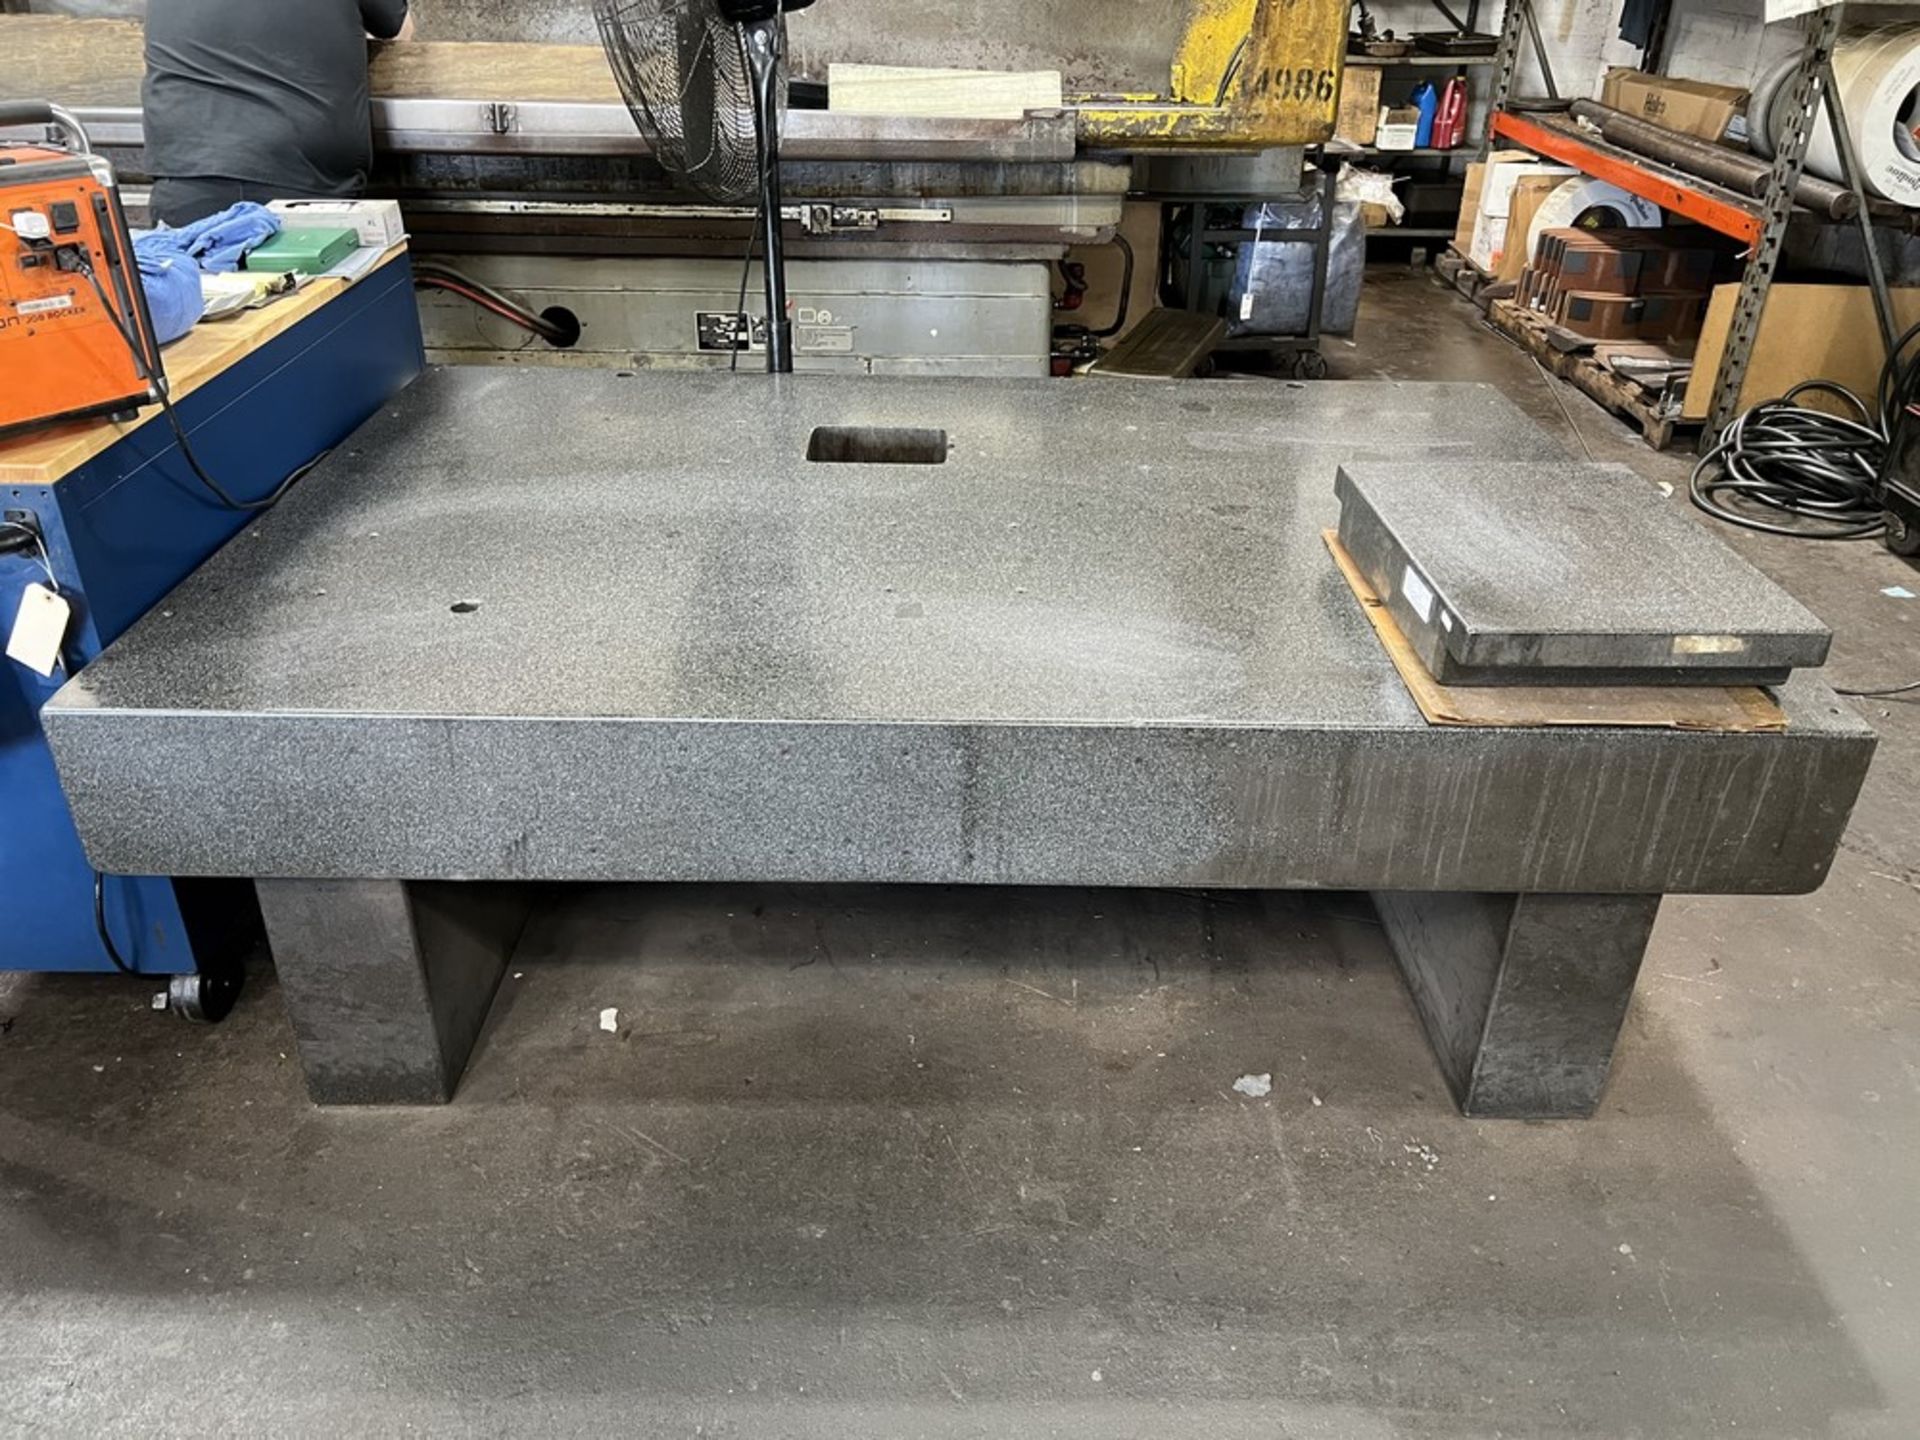 60" X 90" Granite Table & 1 ea. 18" X 24" Surface Plate - Image 2 of 6